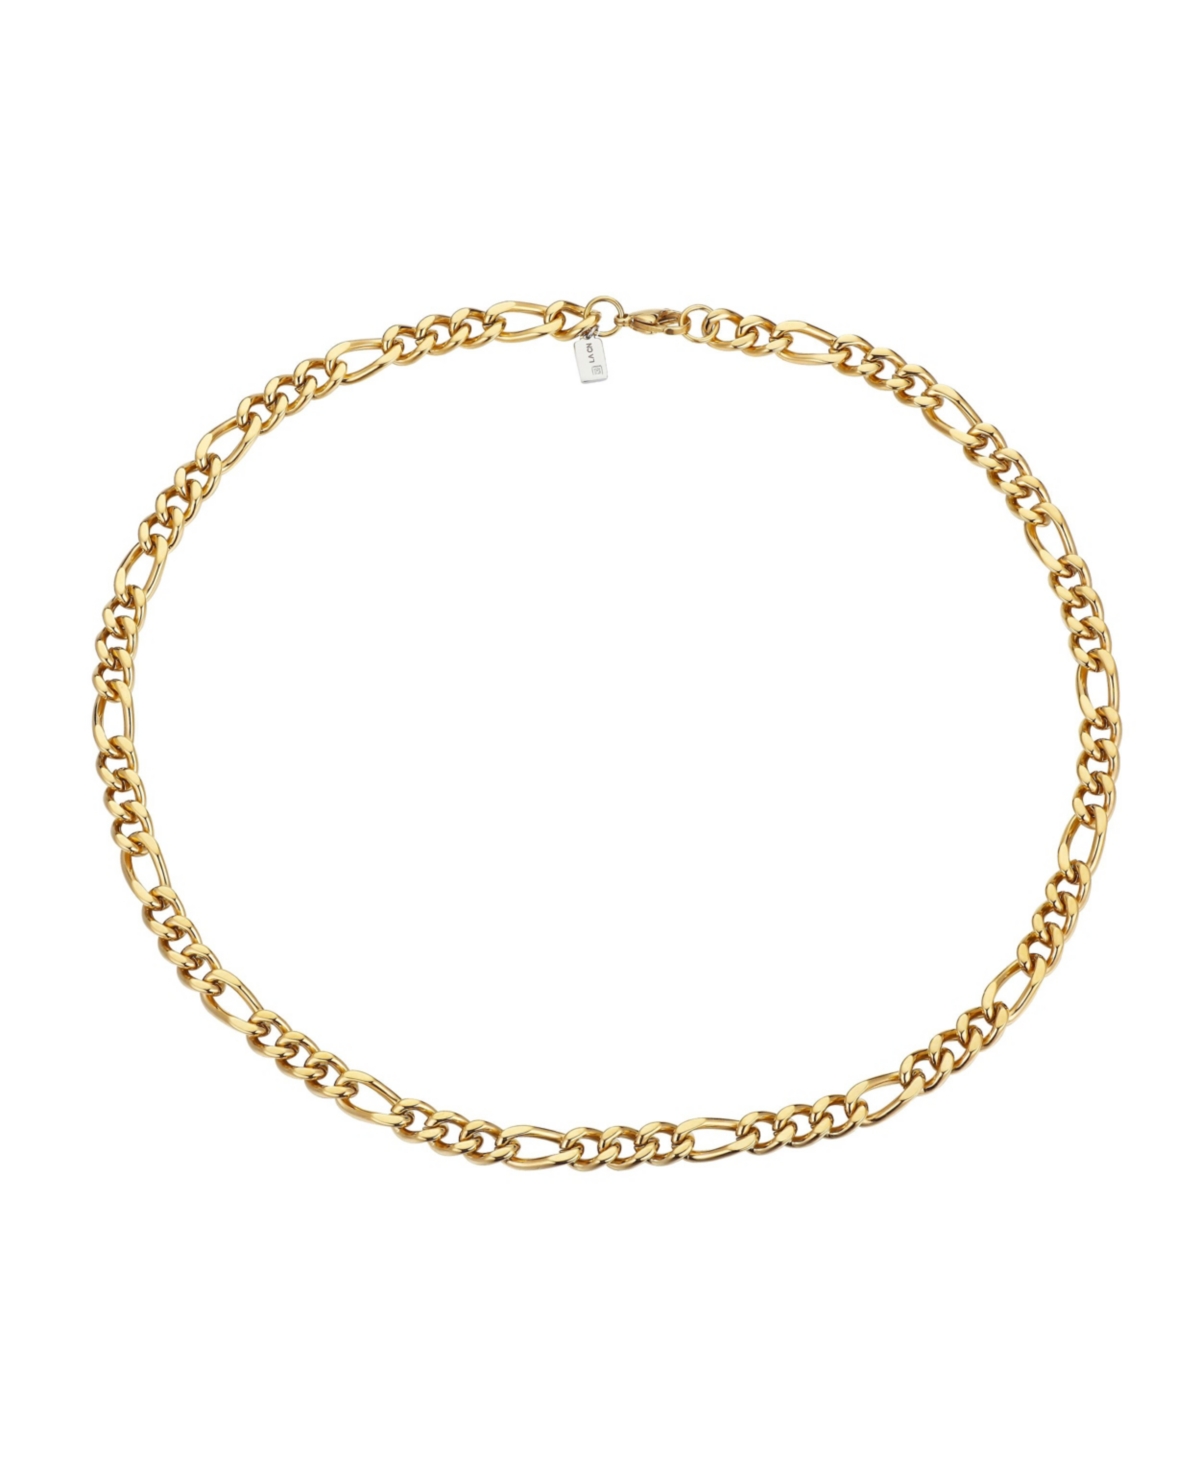 He Rocks Gold Tone Stainless Steel 8.5mm Figaro Chain Necklace, 22"